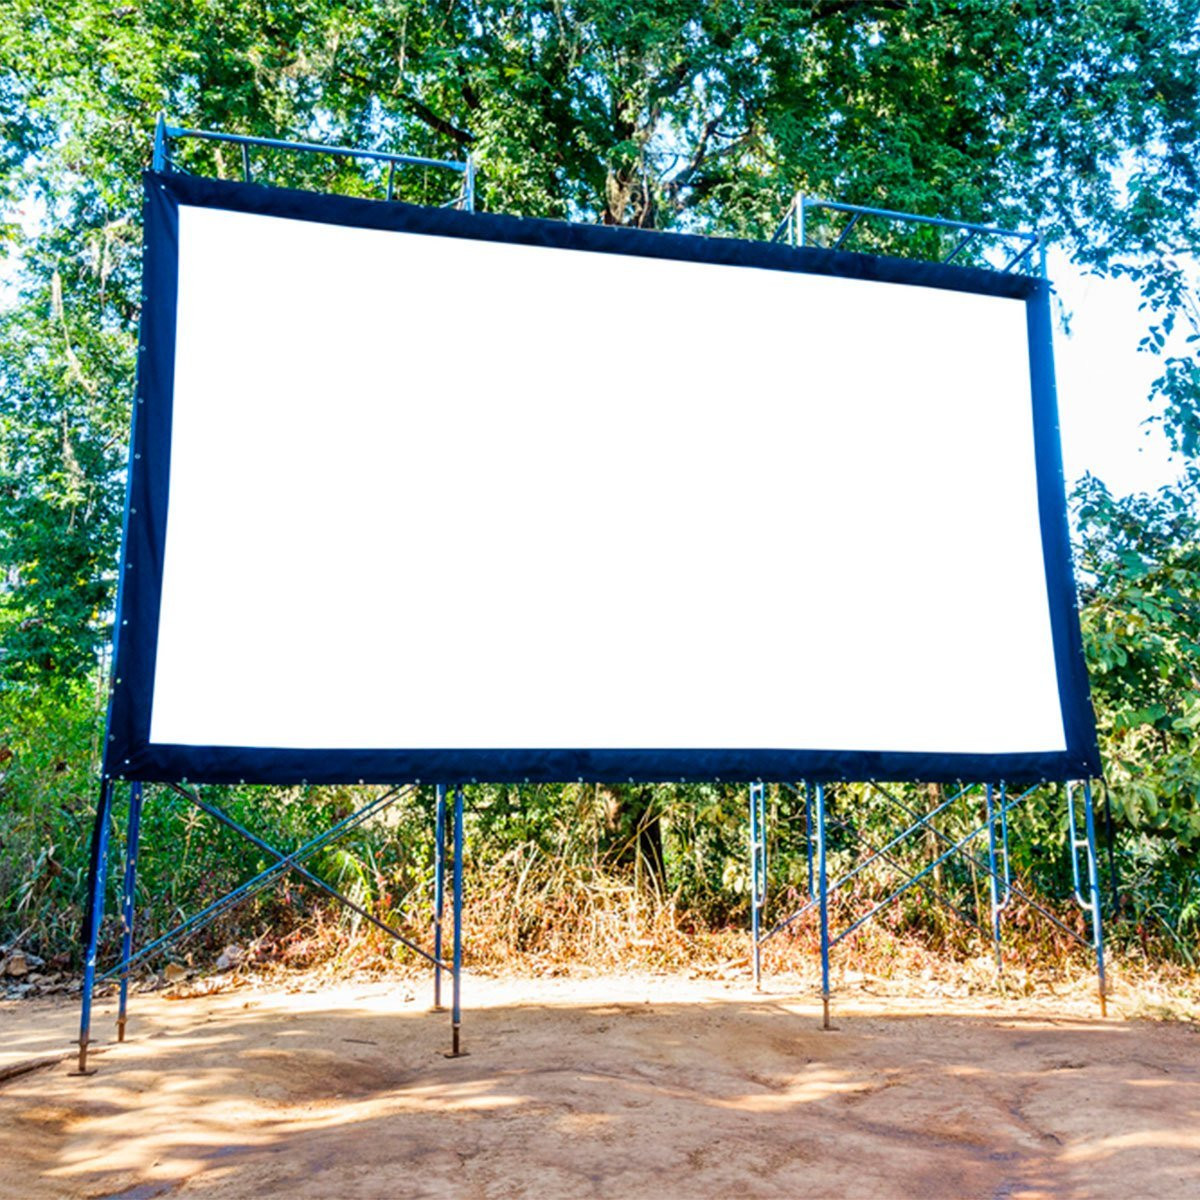 DIY Outdoor Movie Projector
 What You Need for a DIY Backyard Movie Theater